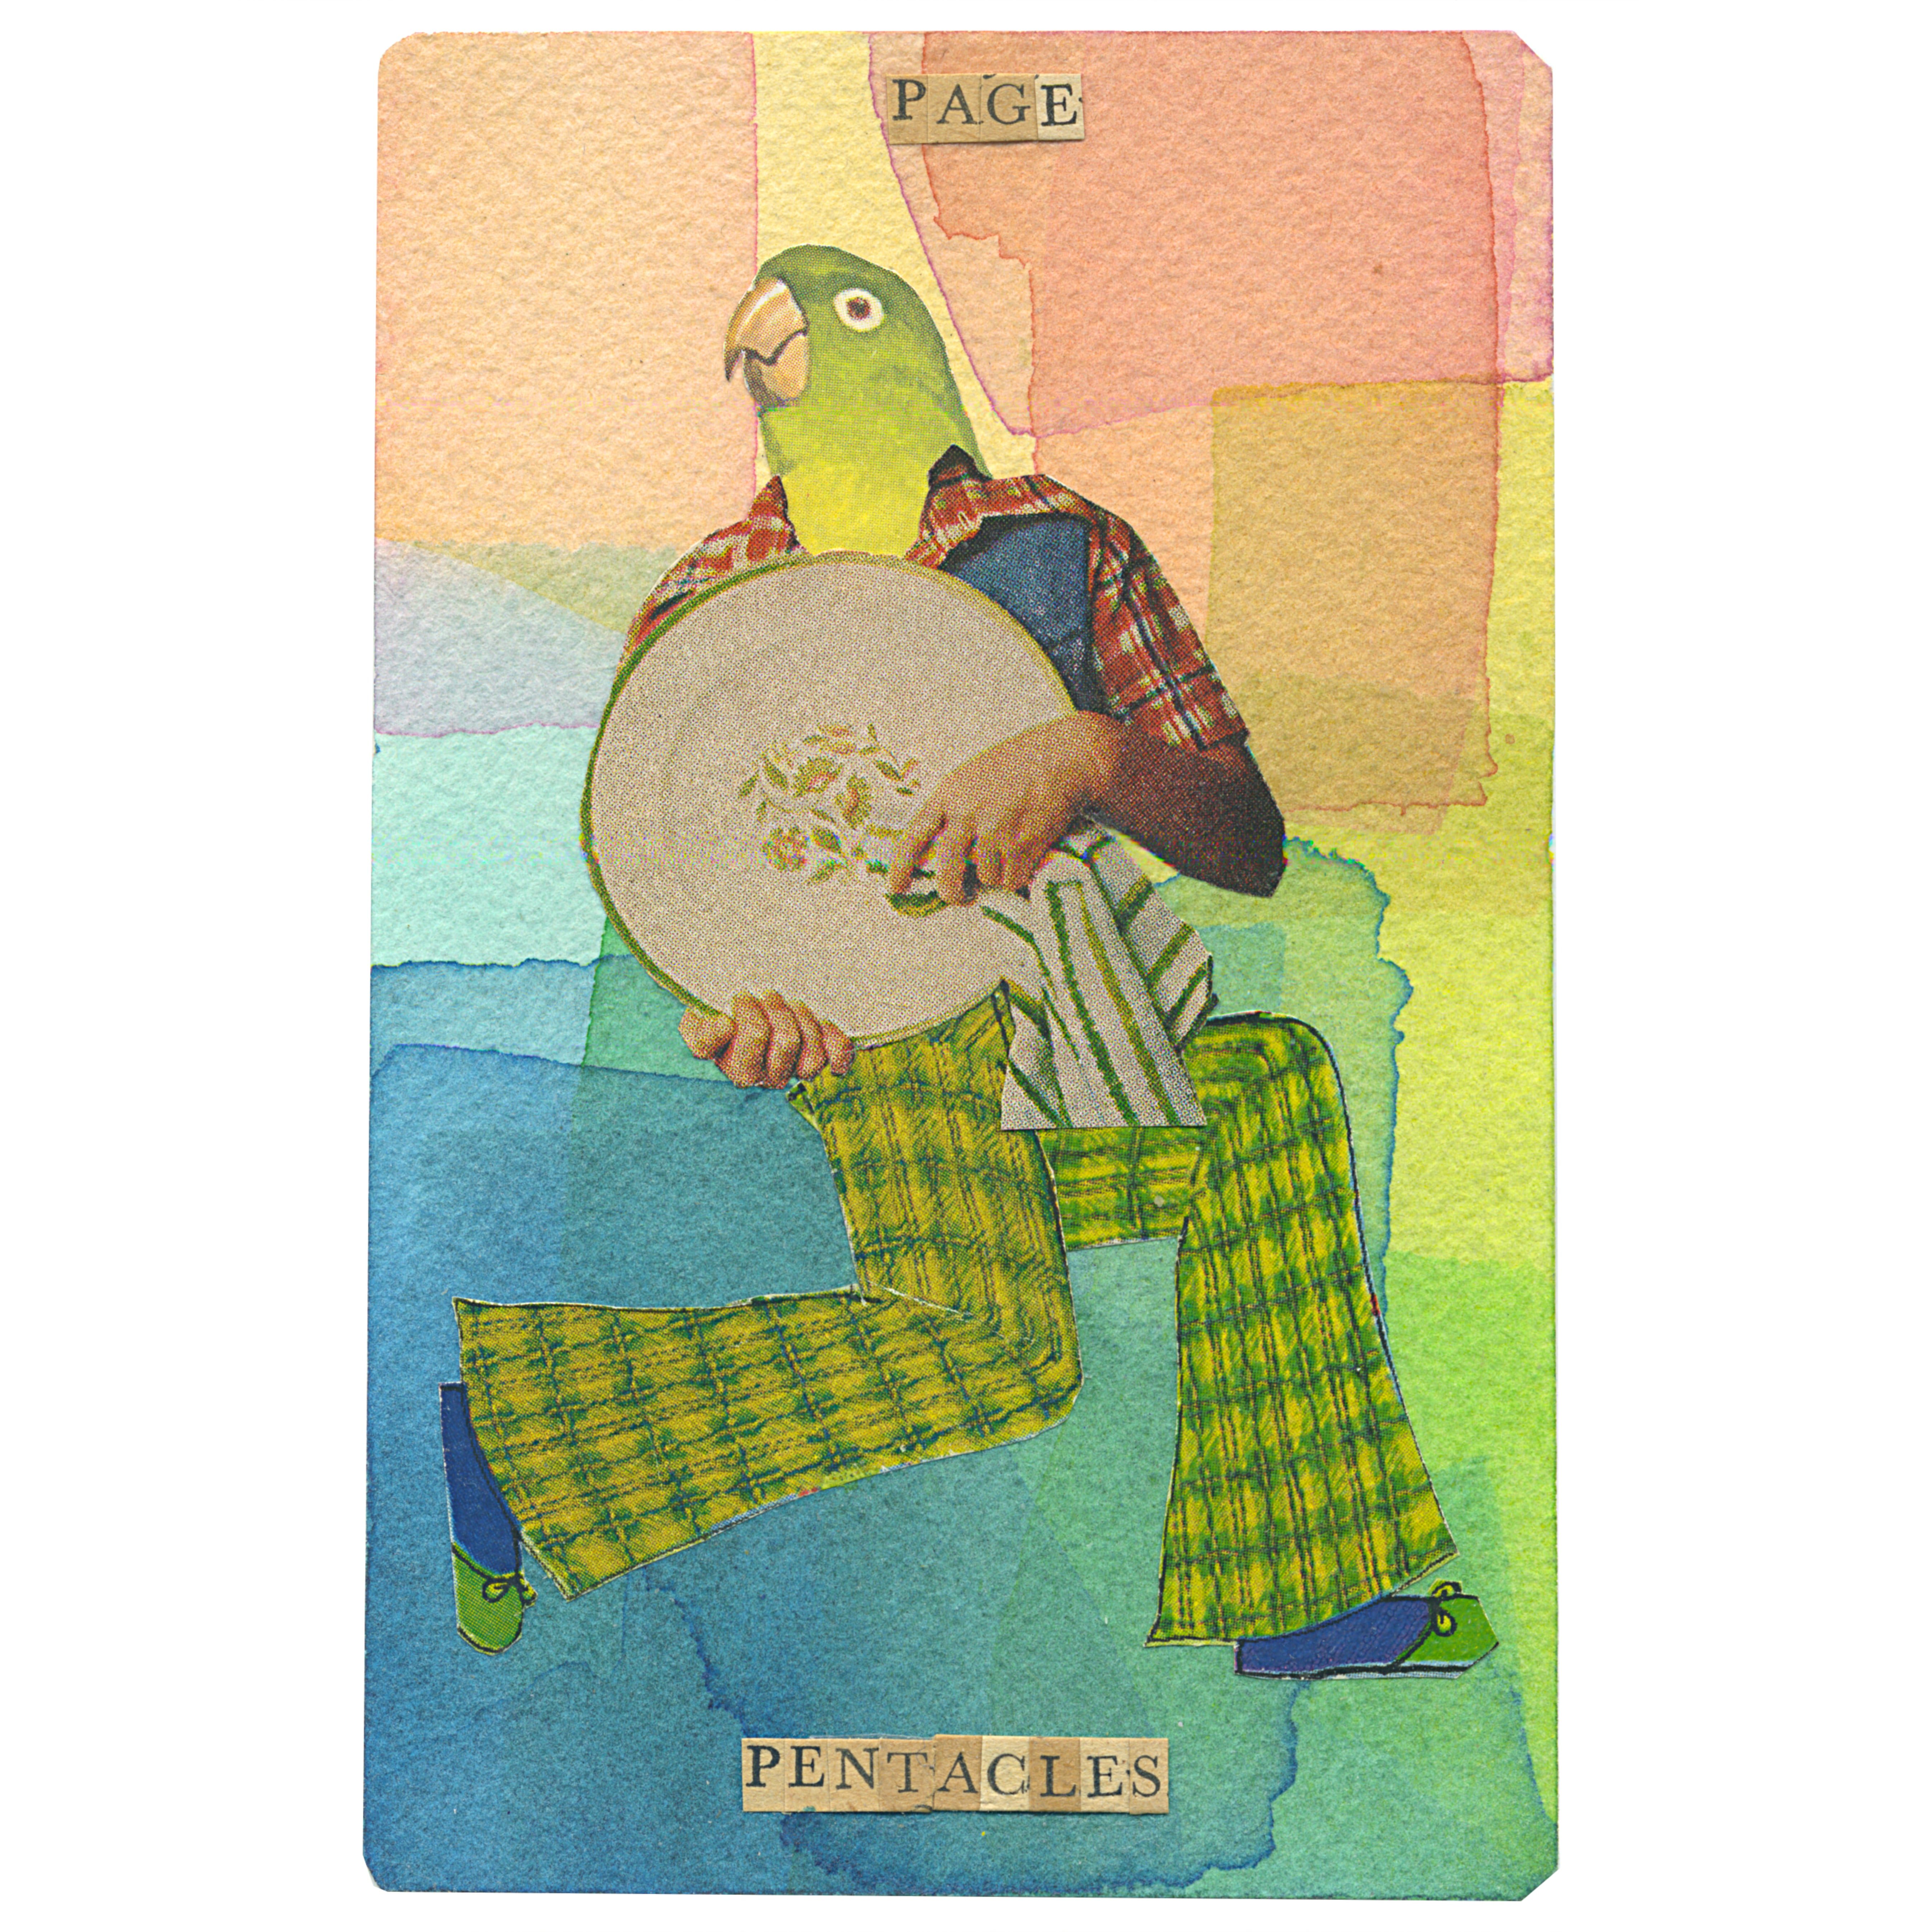 Pentacles page